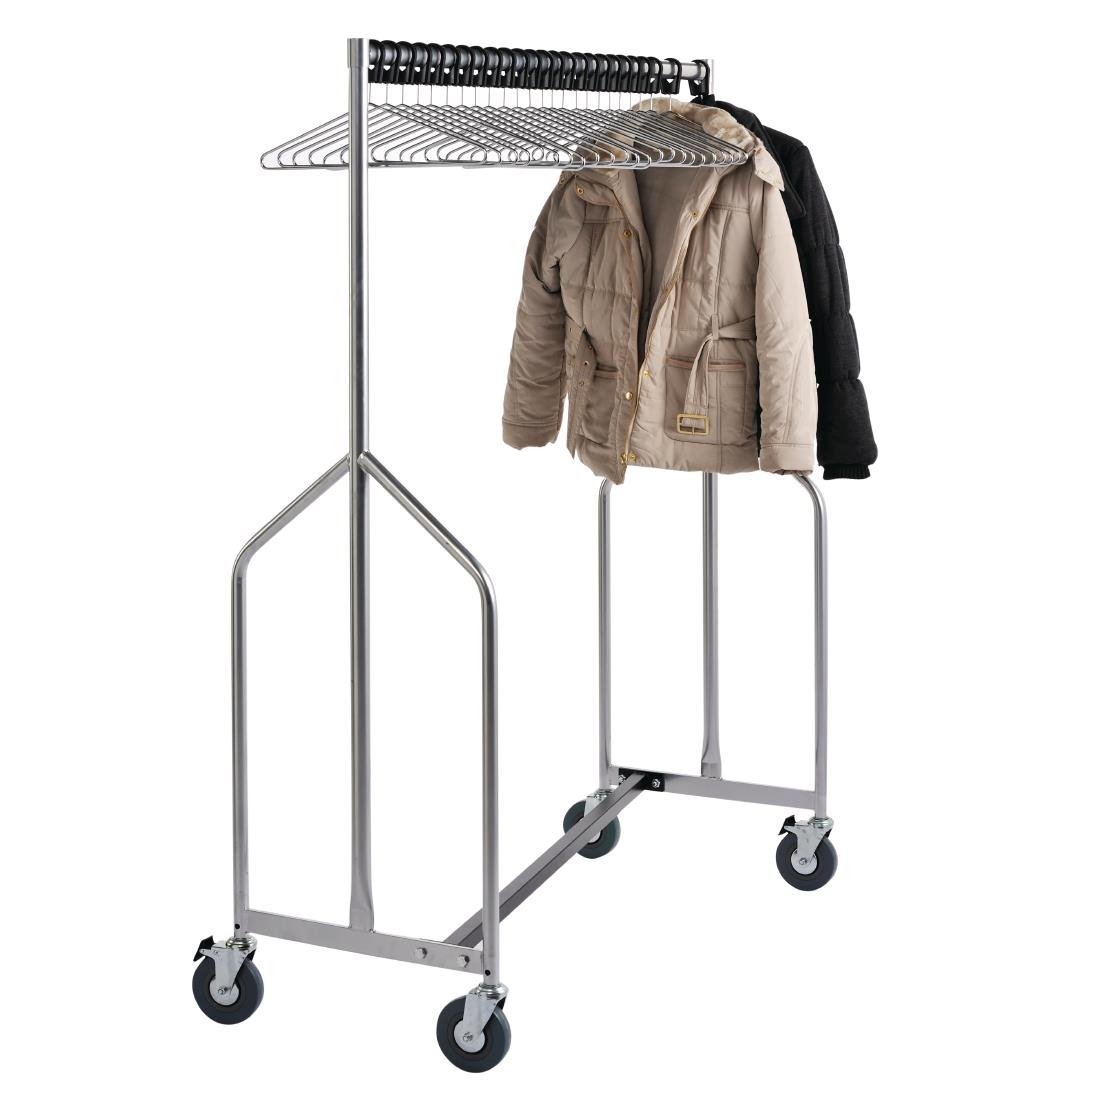 Heavy Duty Z Garment Rail With 25 Anti Theft Hangers JD Catering Equipment Solutions Ltd